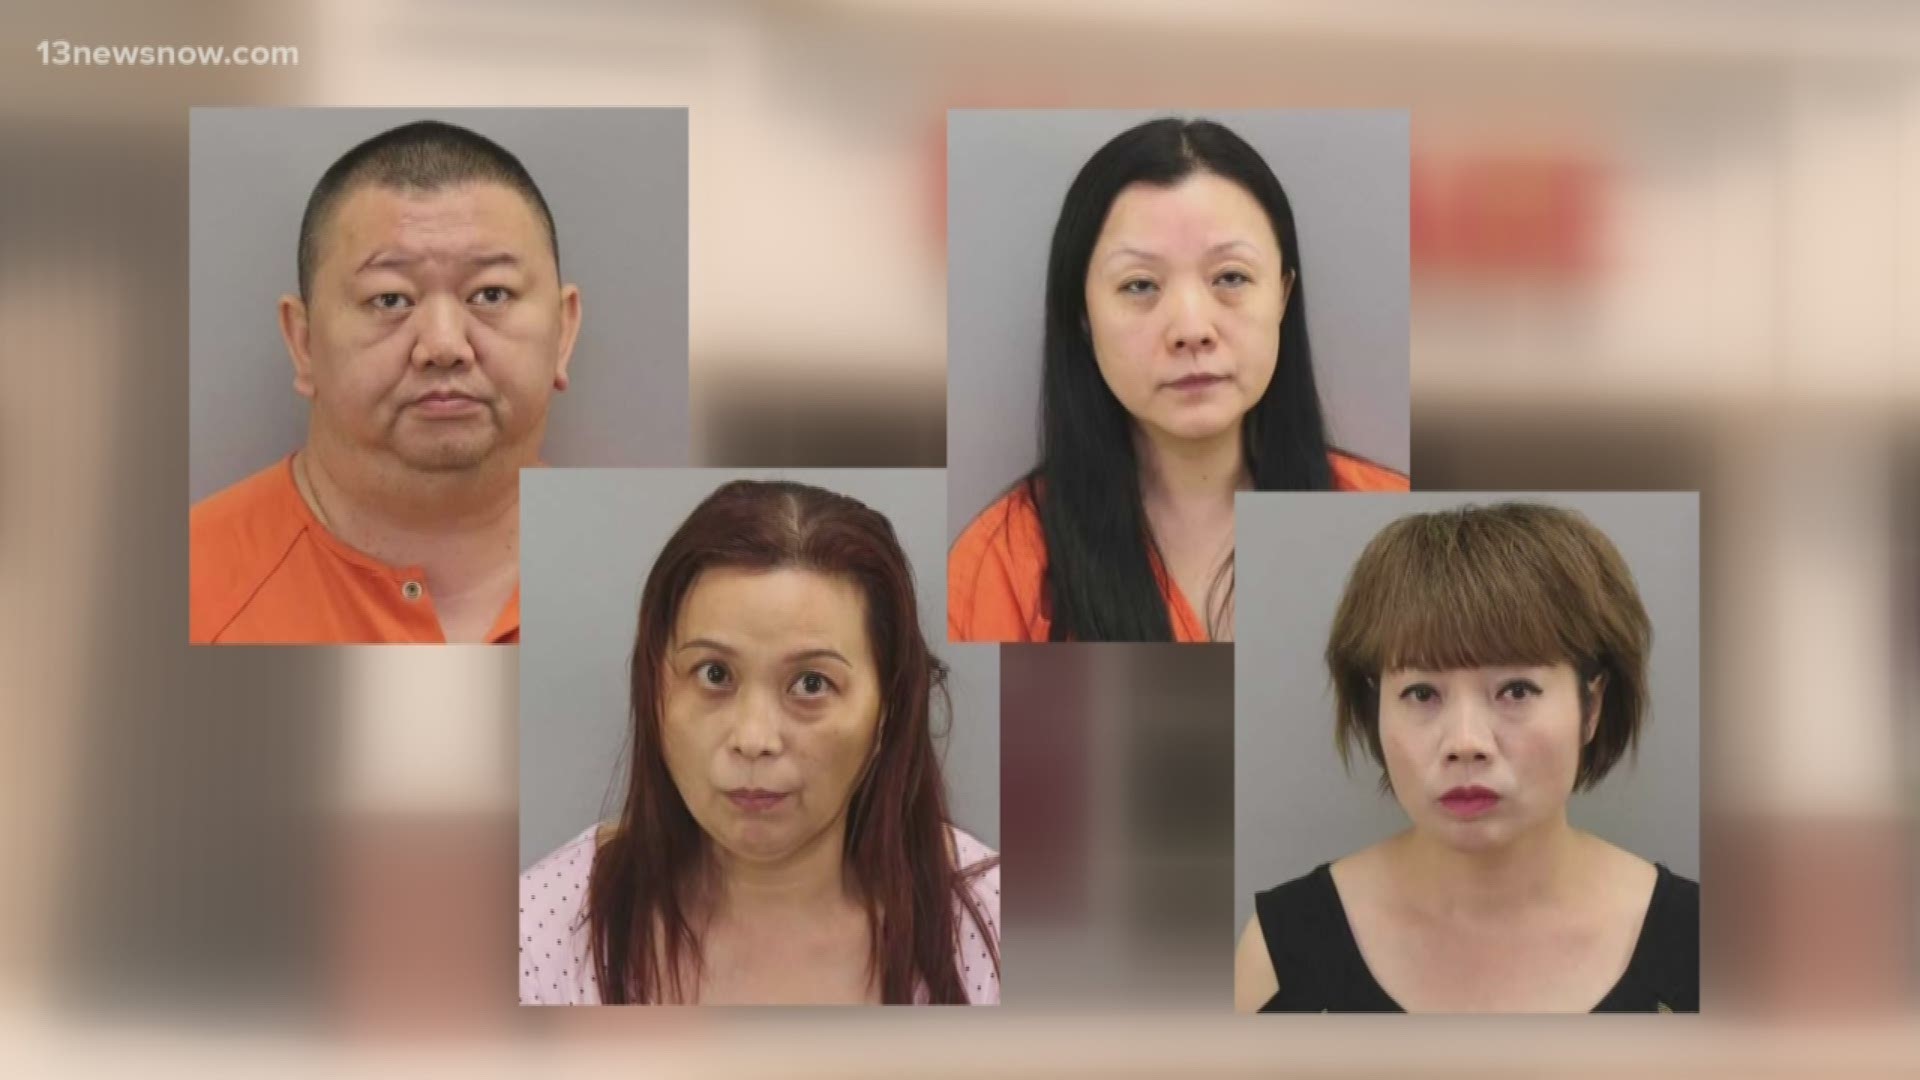 Four massage parlors in Virginia Beach were raided for possible connections to human trafficking. Police arrested four people for charges related to prostitution.